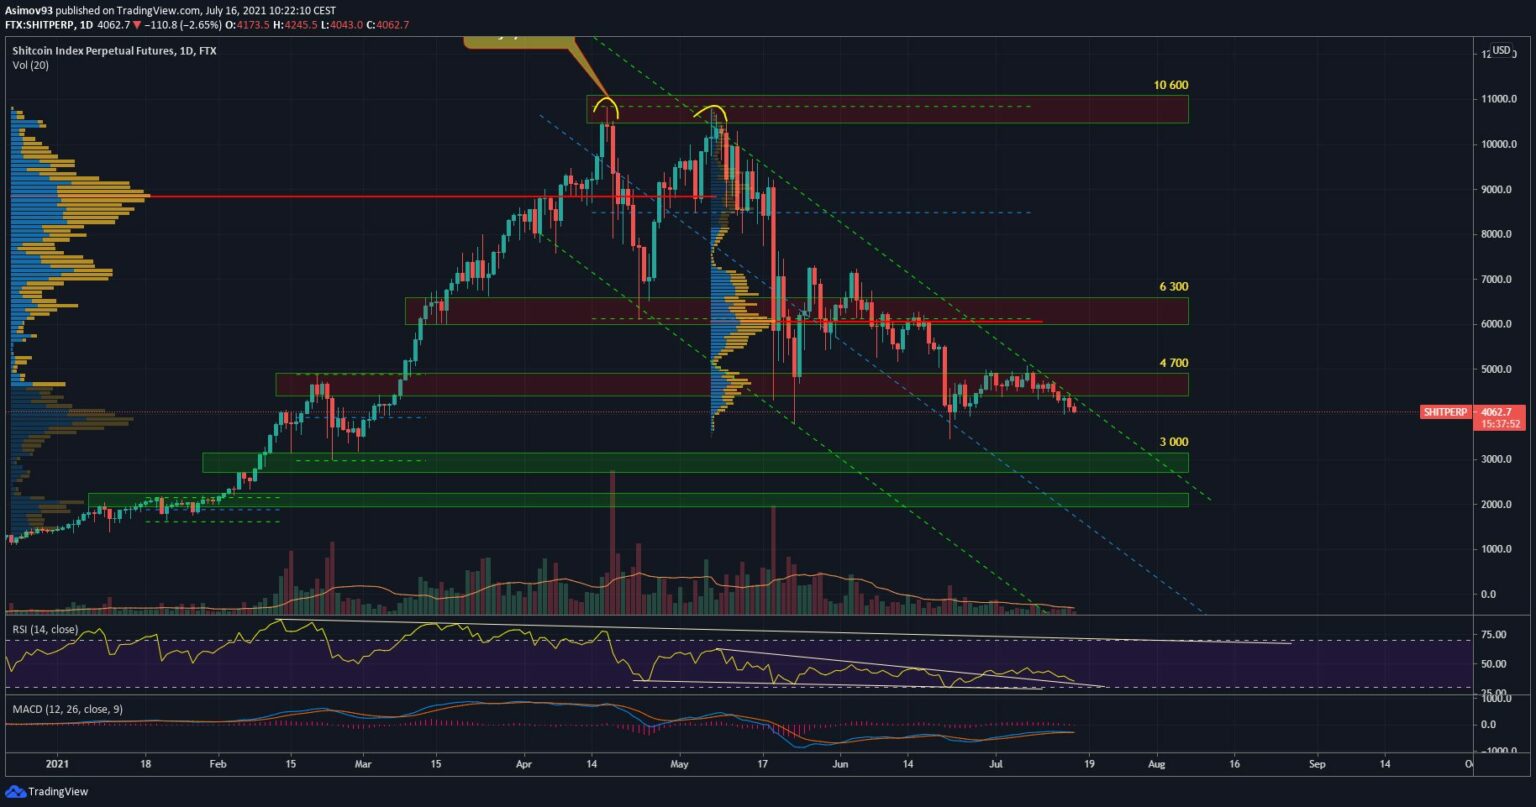 16.07.21 Technical analysis Altcoin Index and Shitcoin Index - altcoins are declining to key supports, an opportunity?